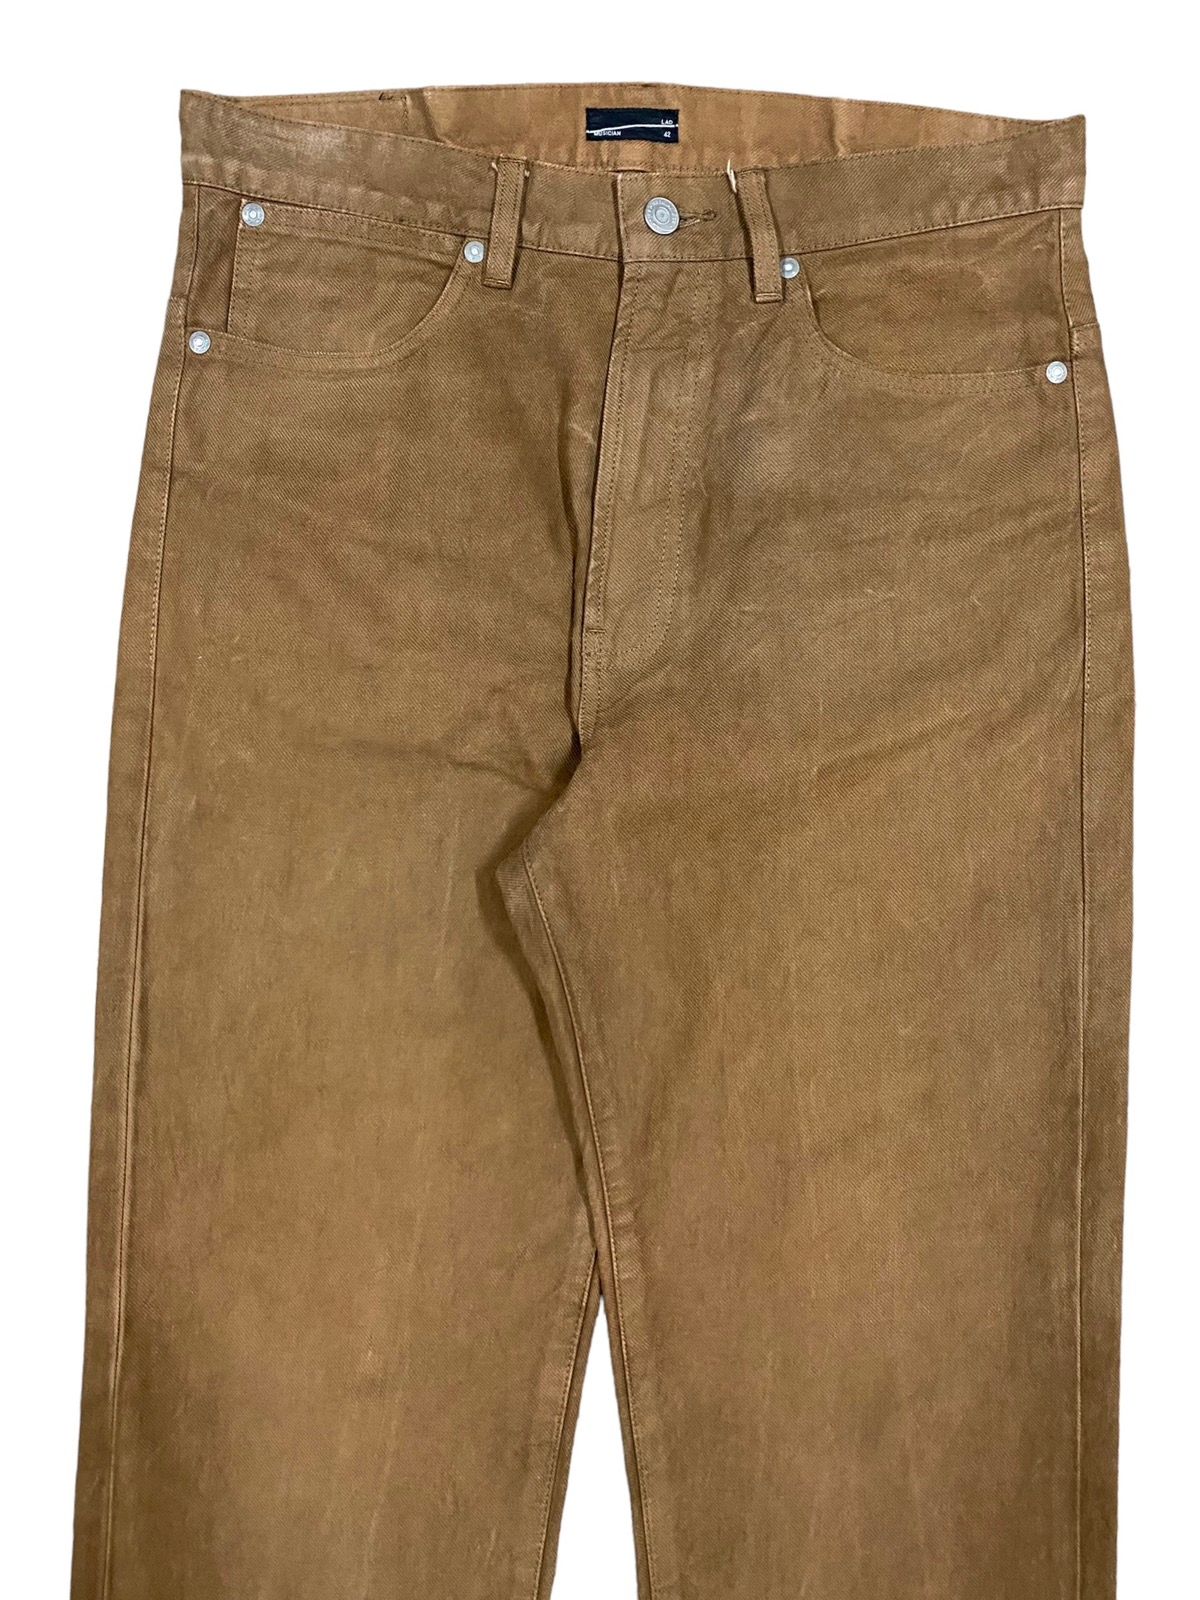 Lad Musician Brown Straight Cup Jeans Made In Japan - 4